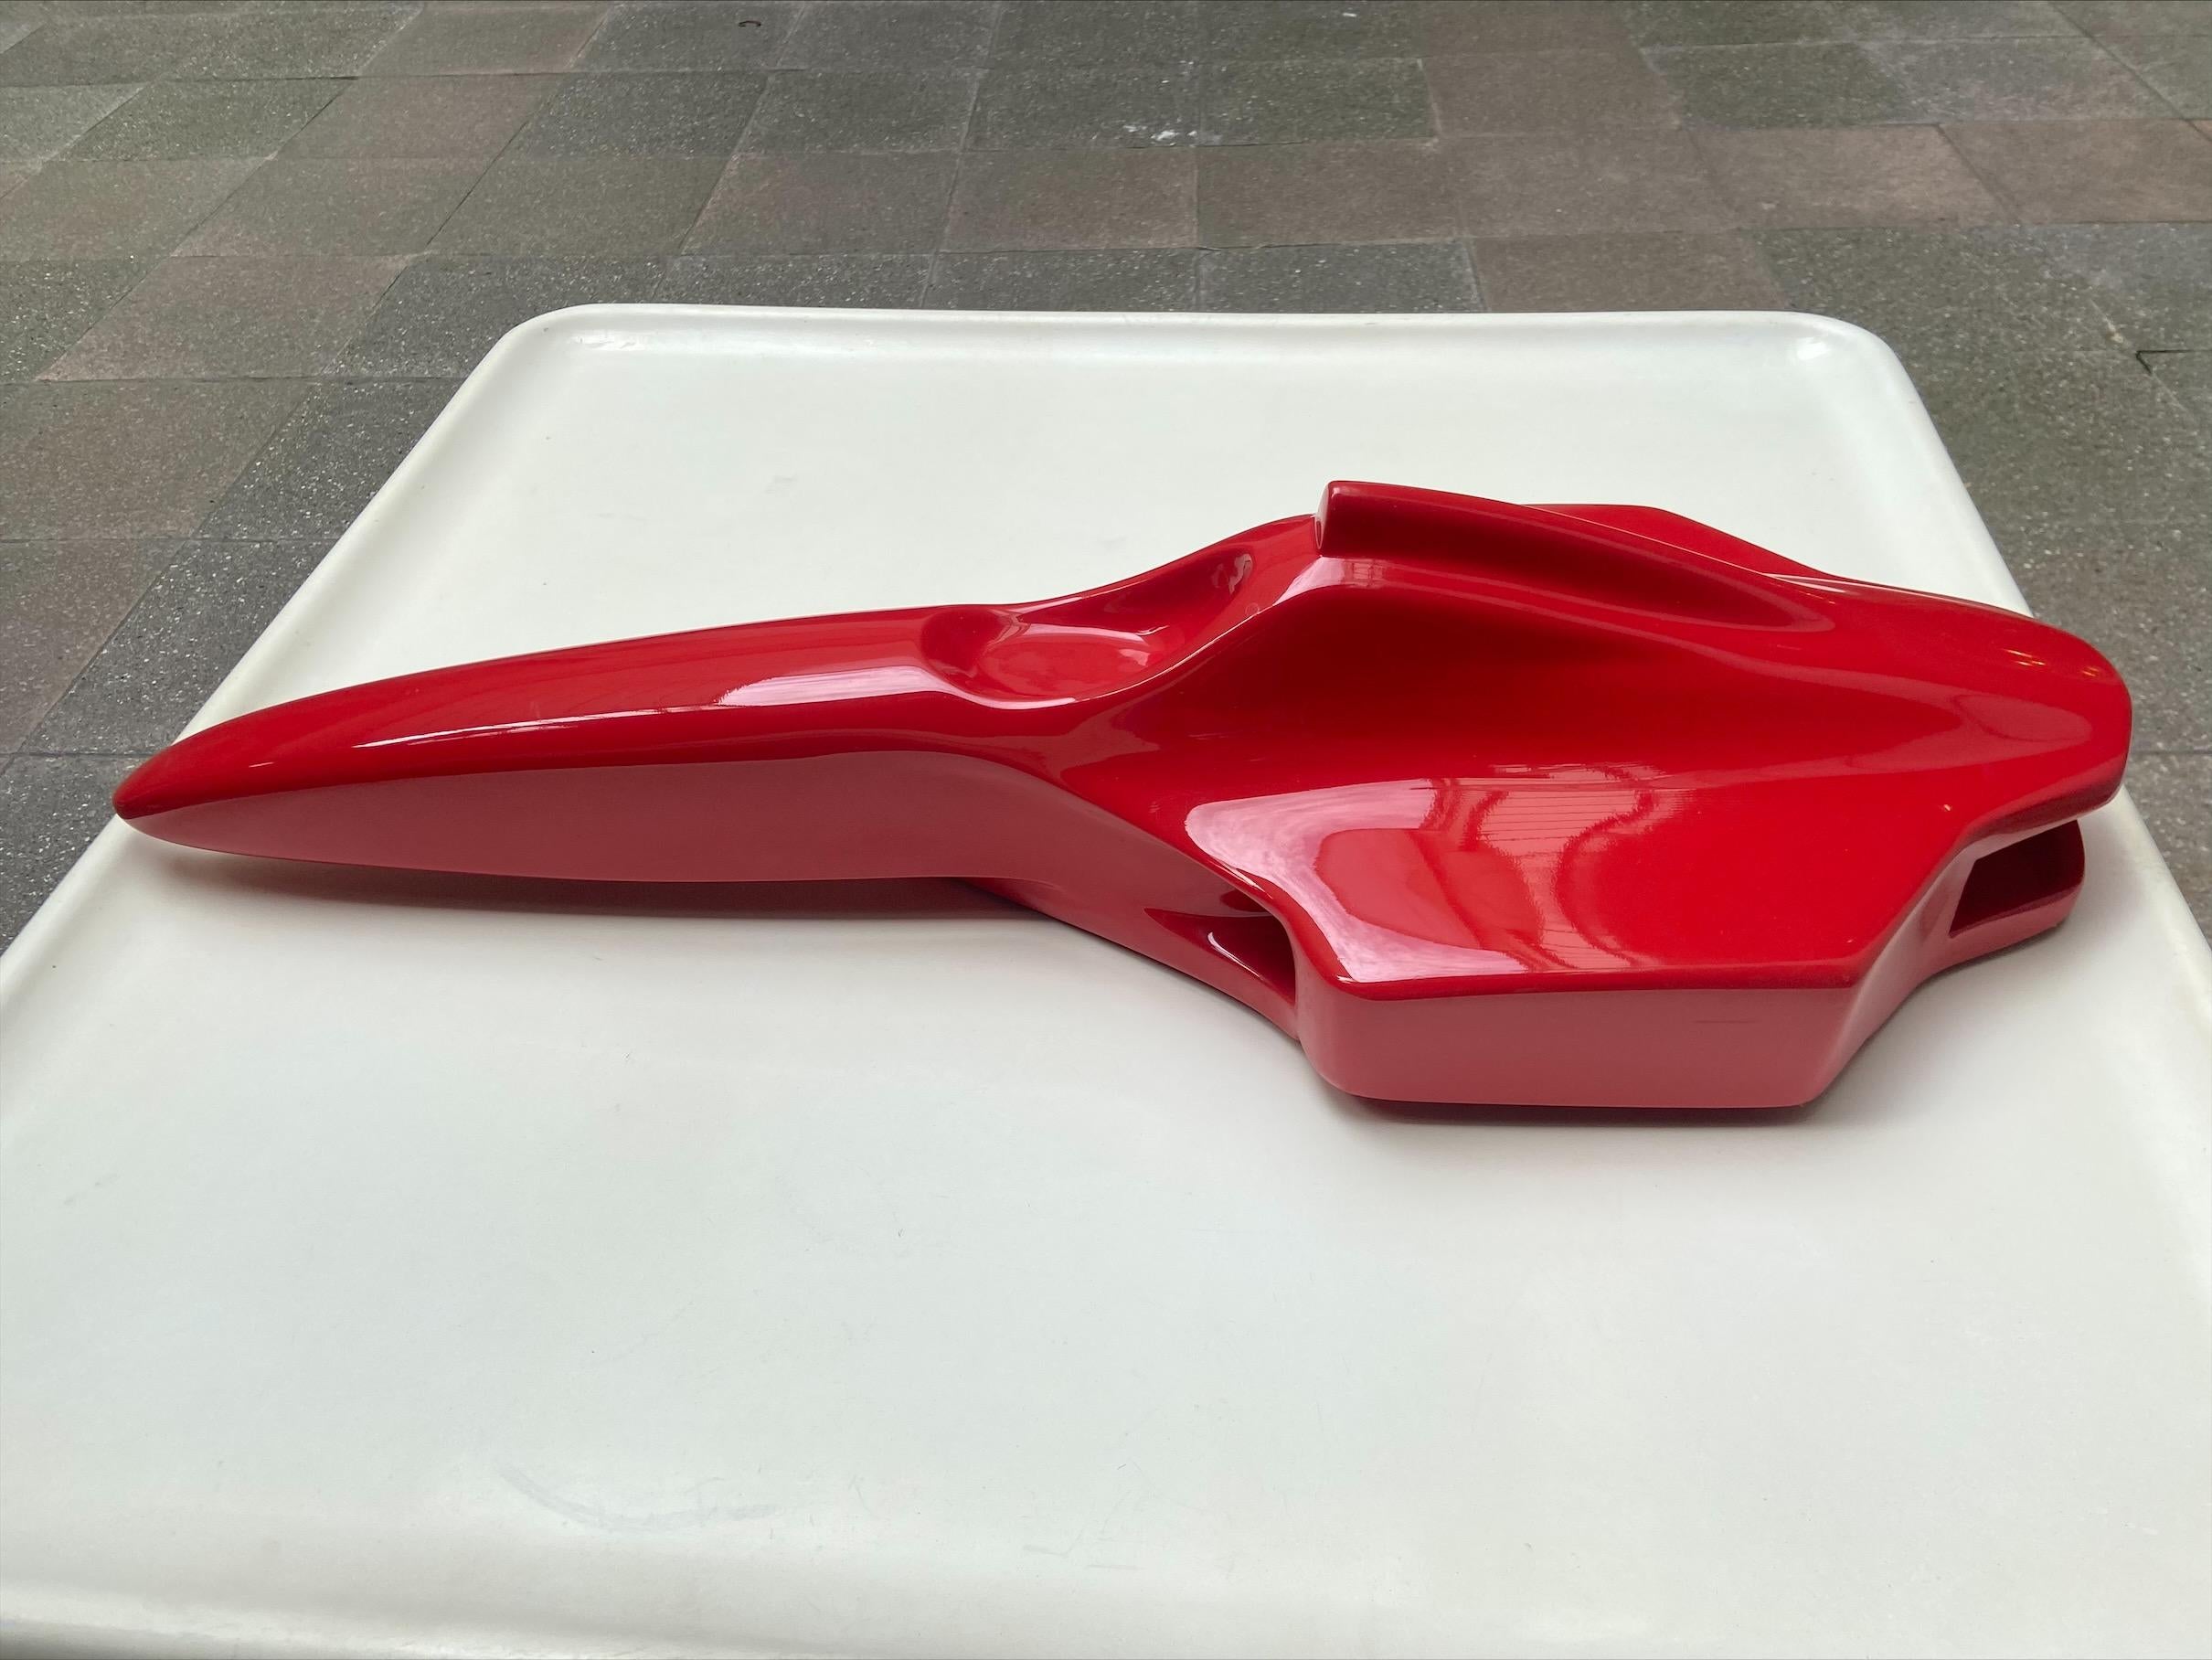 Red Bird - André Ferrand
Car sculpture
In red resin
Unique piece
W79xD30xH19cm
1983
Dated and signed
In very good state.